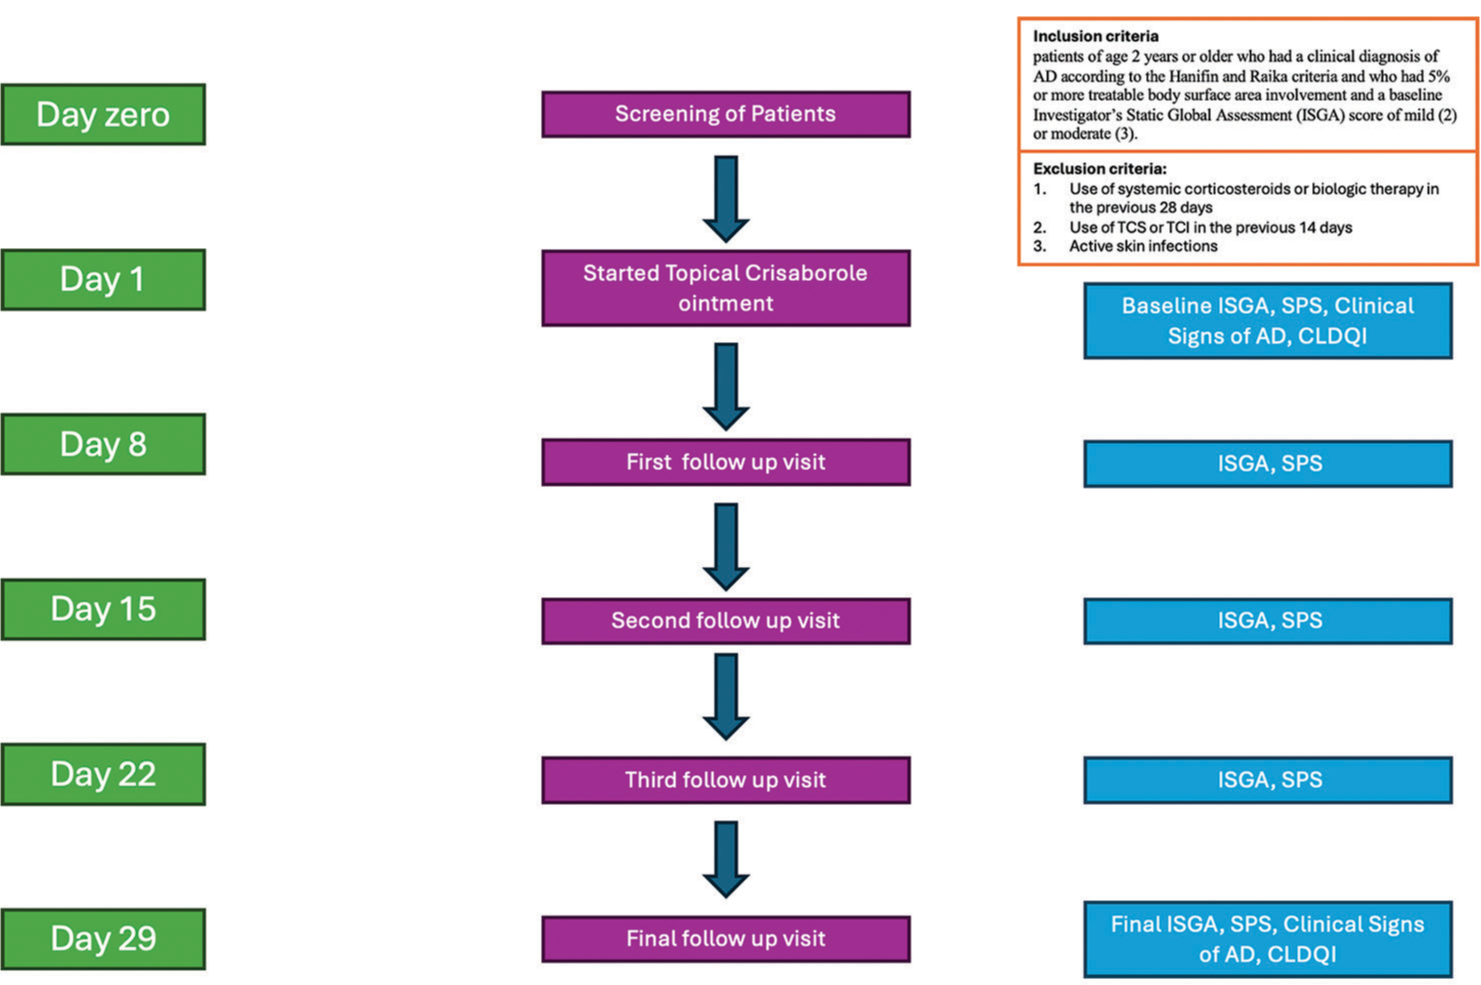 Flowchart; TCS: topical corticosteroids; TCI: topical calcineurin inhibitors; AD: atopic dermatitis; CLDQI: Children’s dermatology quality of life index; SPS: severity of pruritus score.